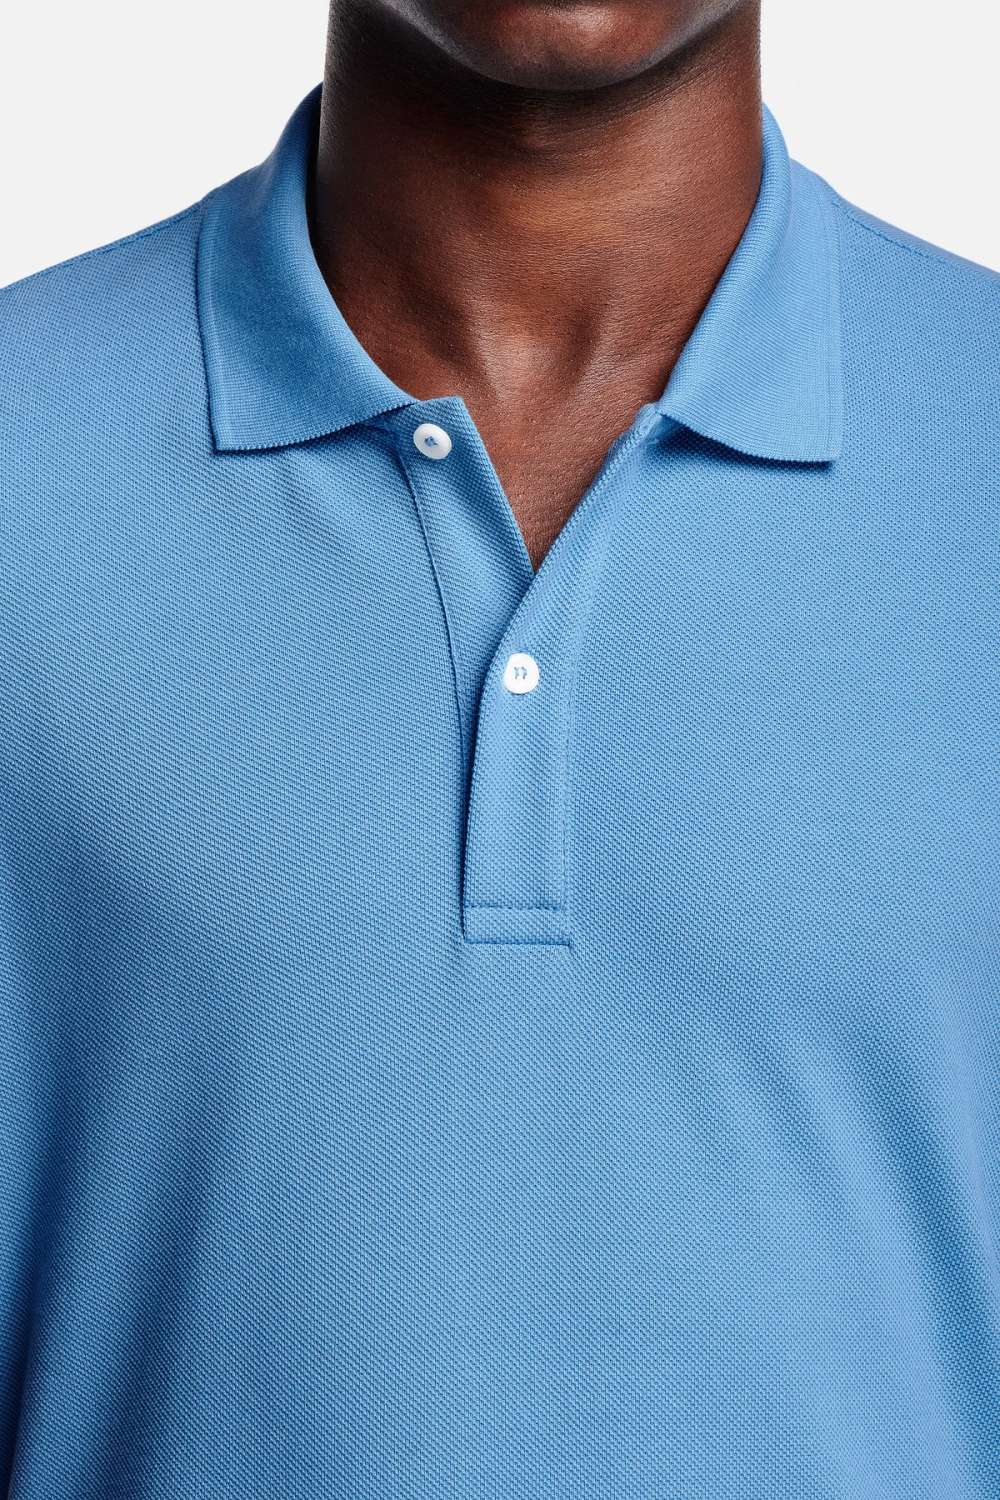 Boulevards * The Classic Polo